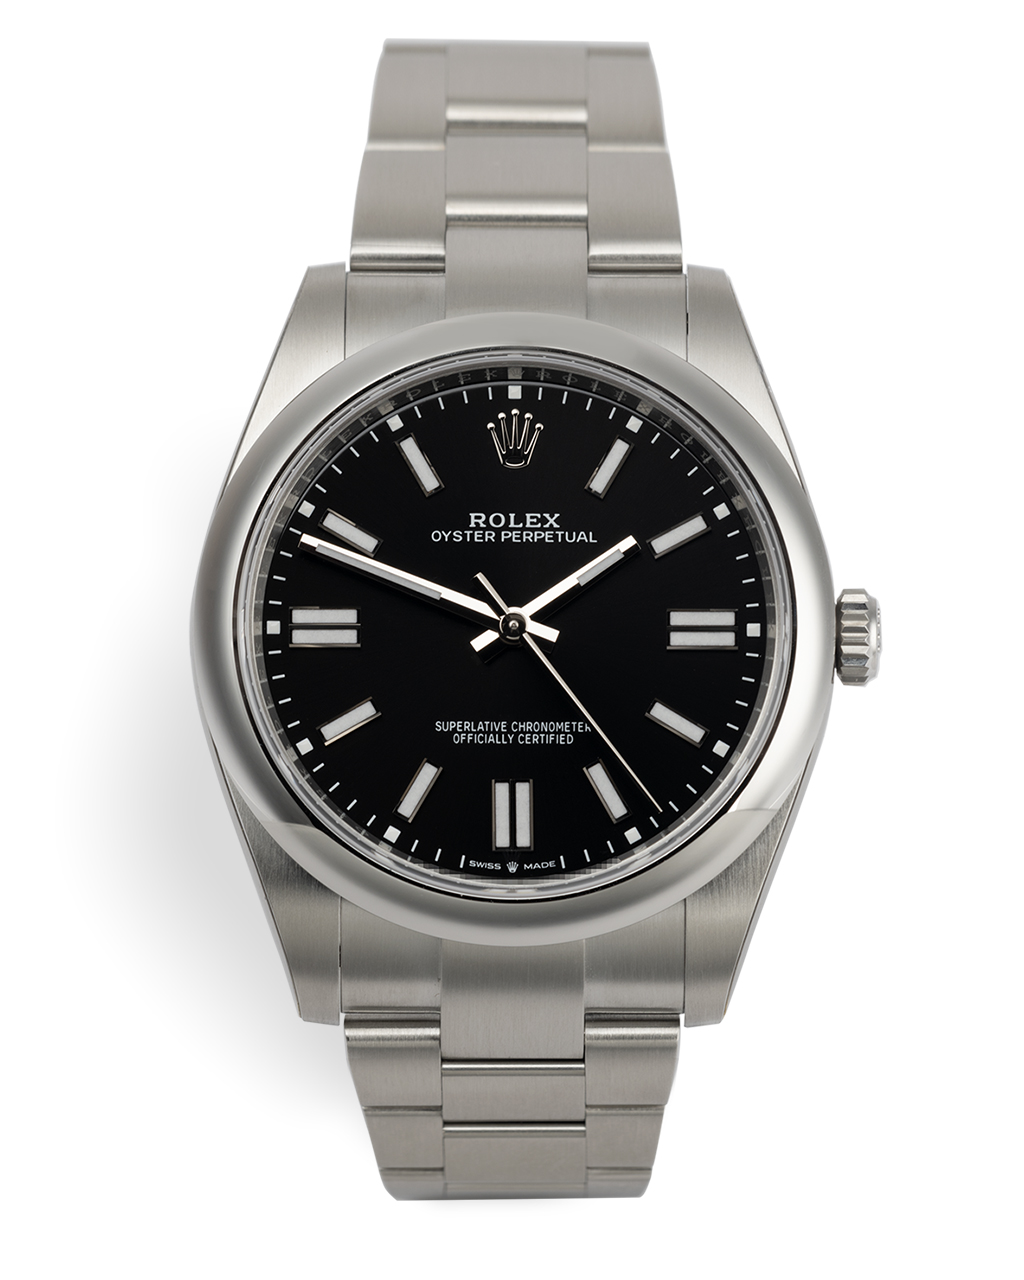 Rolex Oyster Perpetual Watches | ref 124300 | New Release - 5 Year ...